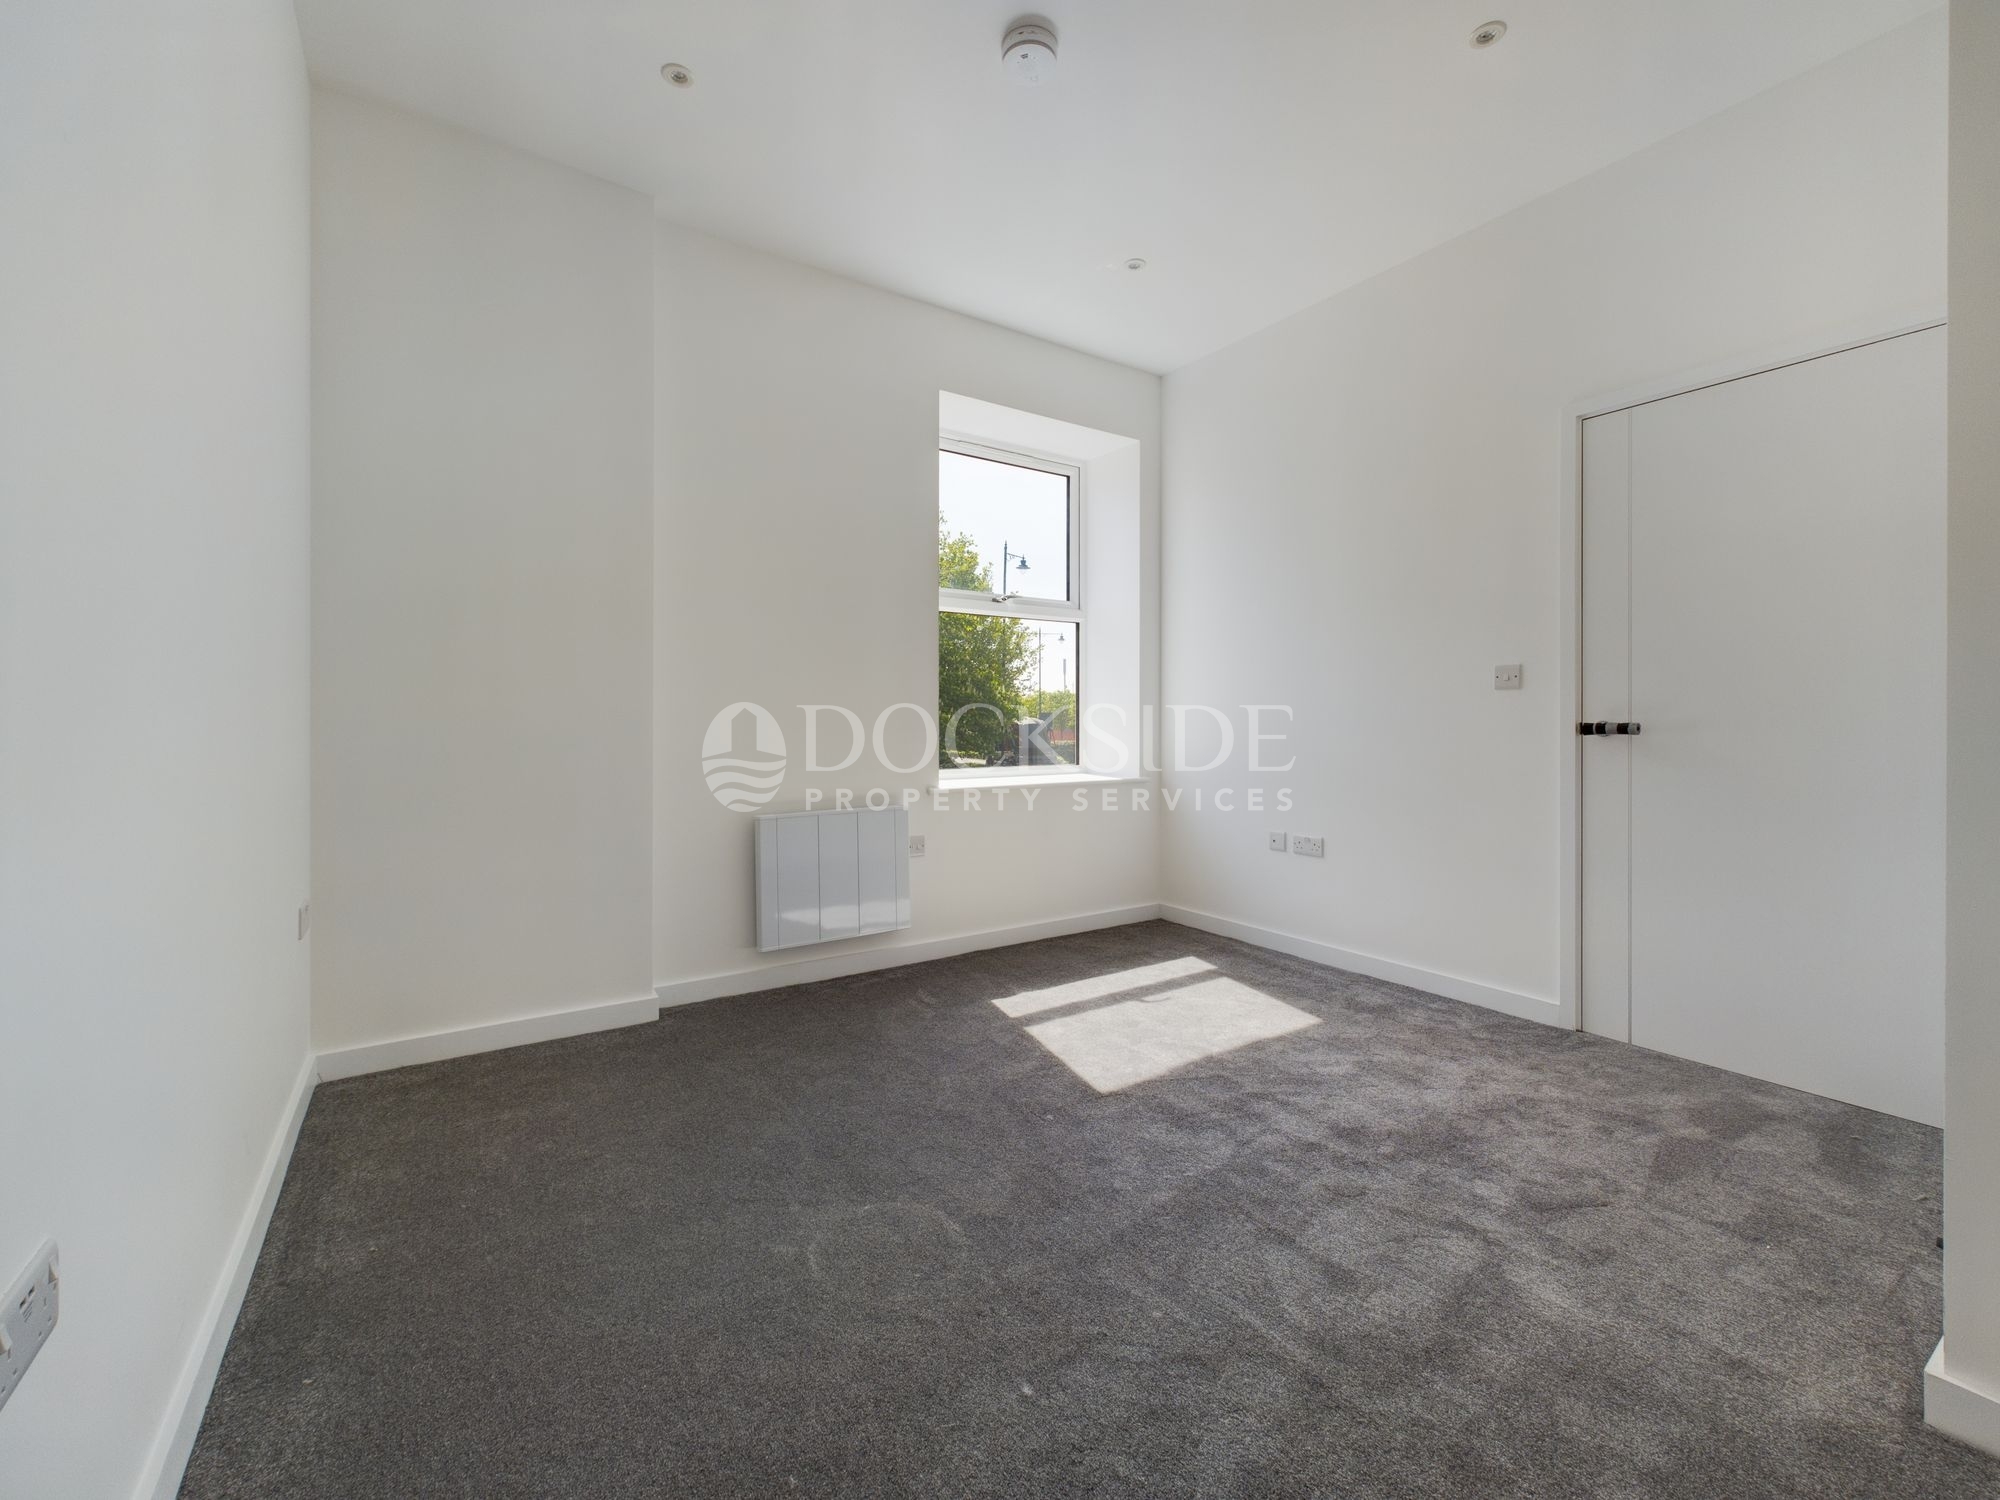 1 bed to rent in Chatham Maritime, Chatham  - Property Image 7